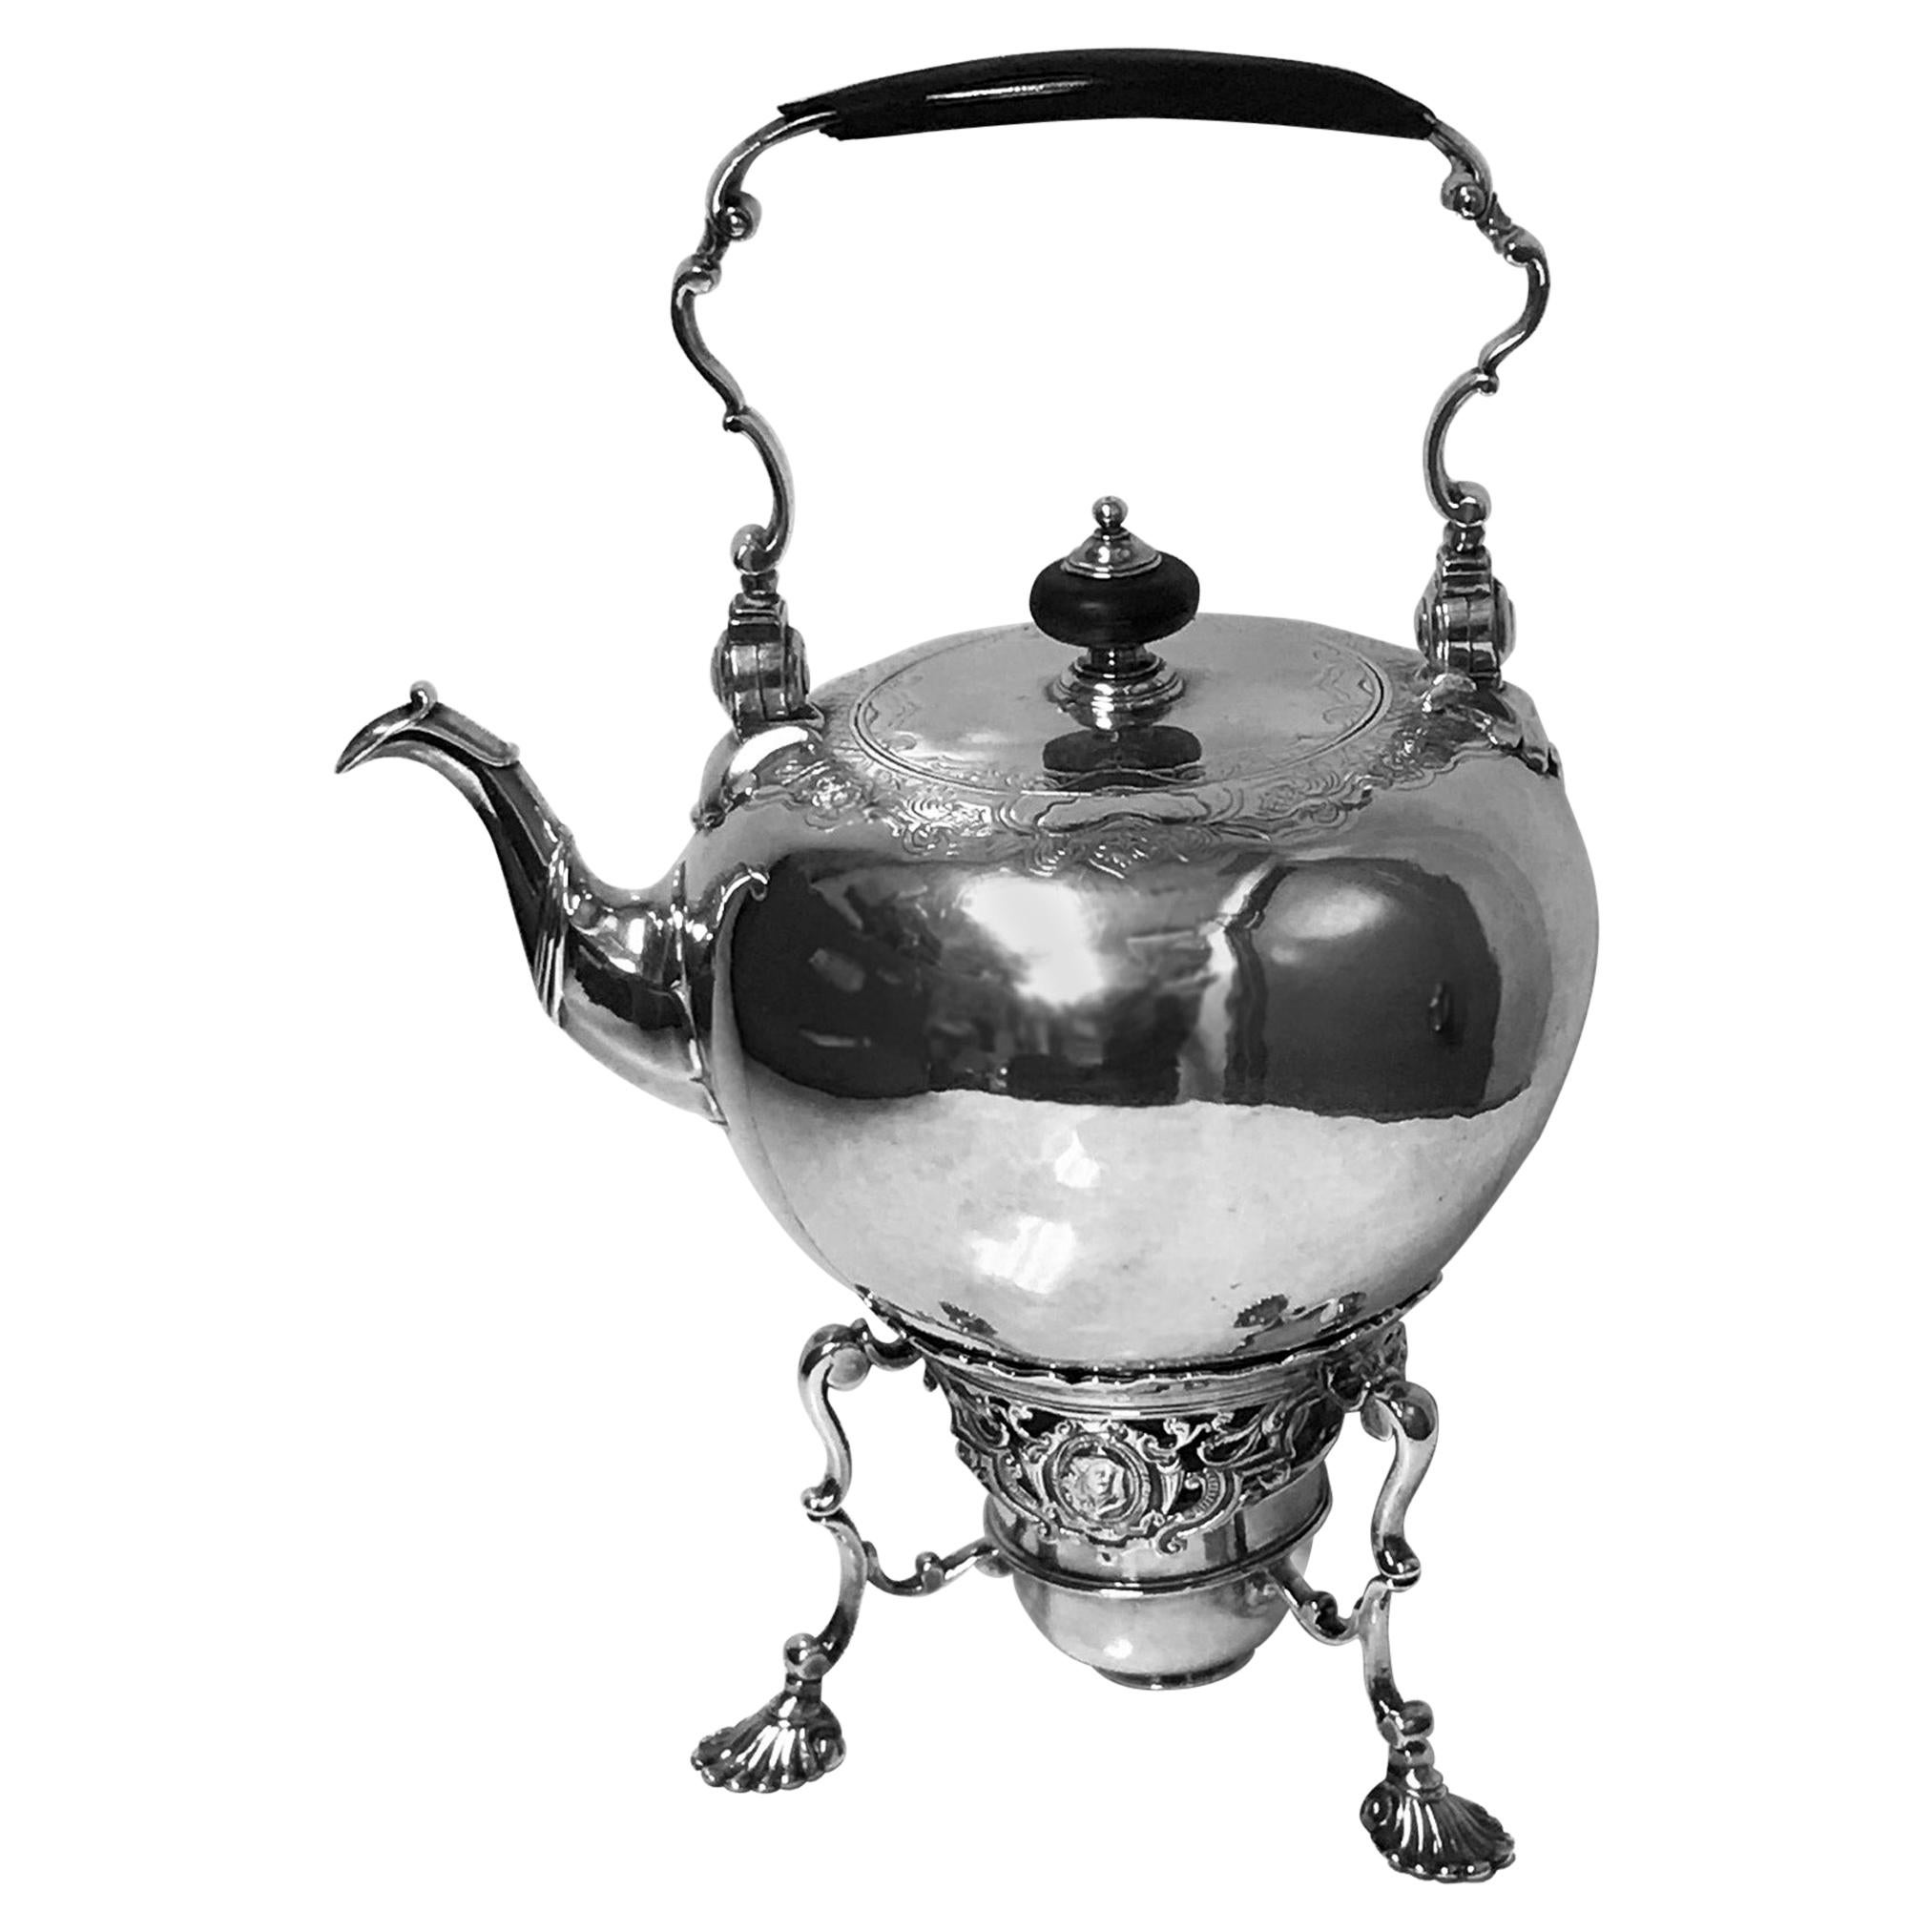 George 11 Silver Kettle on Stand London 1736 Richard Gurney and Thomas Cook